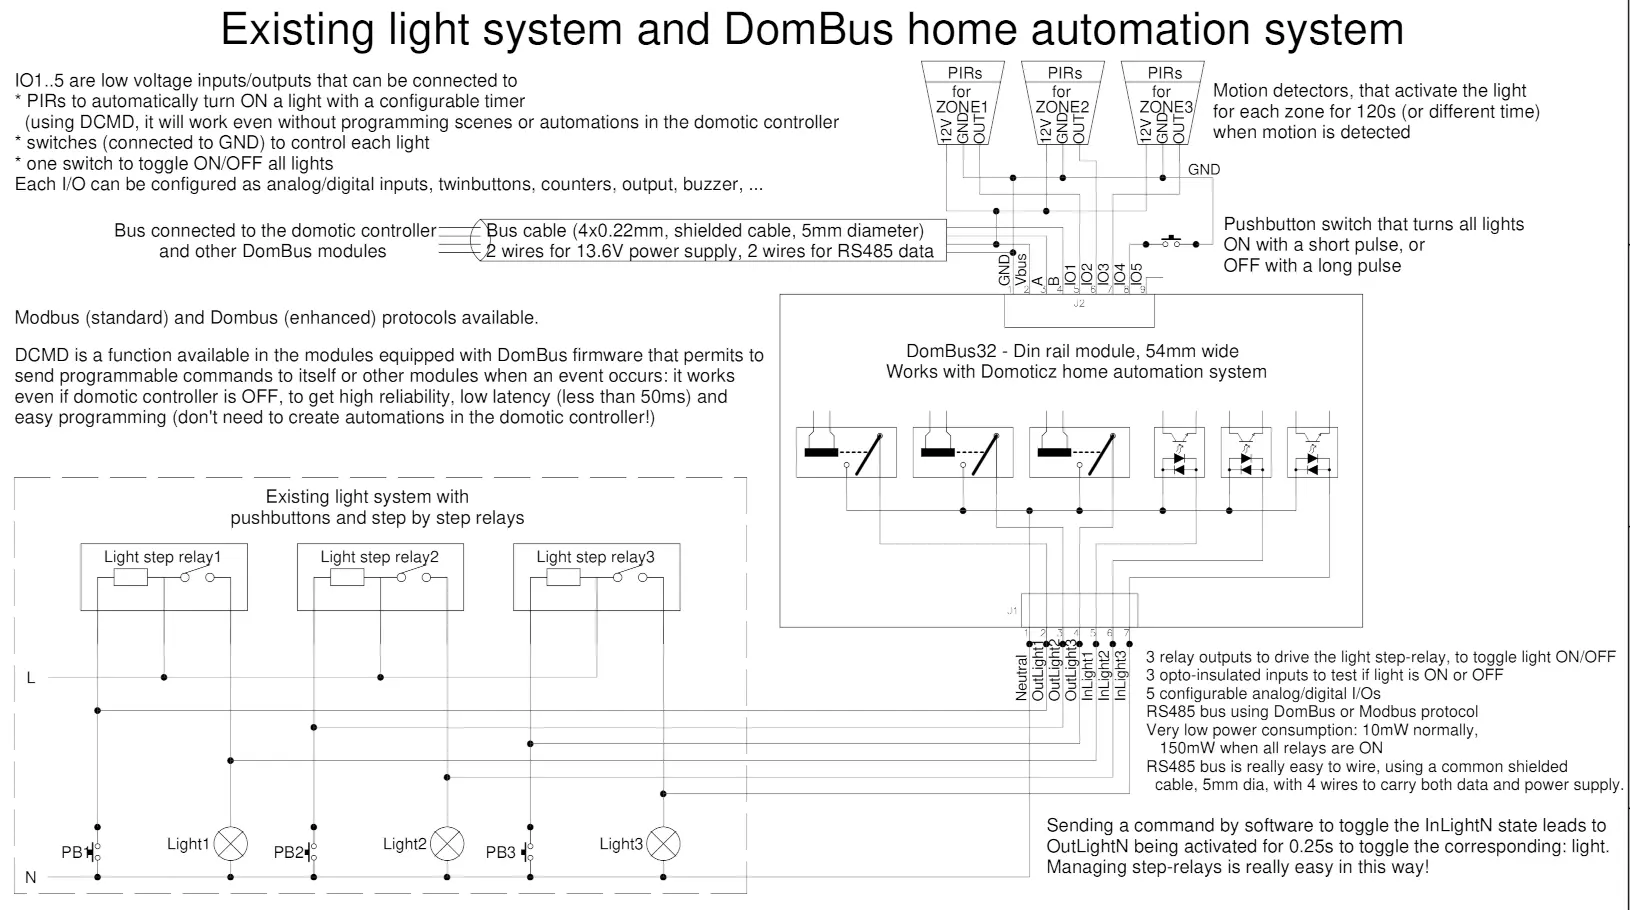 Domoticz module with 3 relay outputs, 3 AC inputs, 5 configurable inputs/outputs